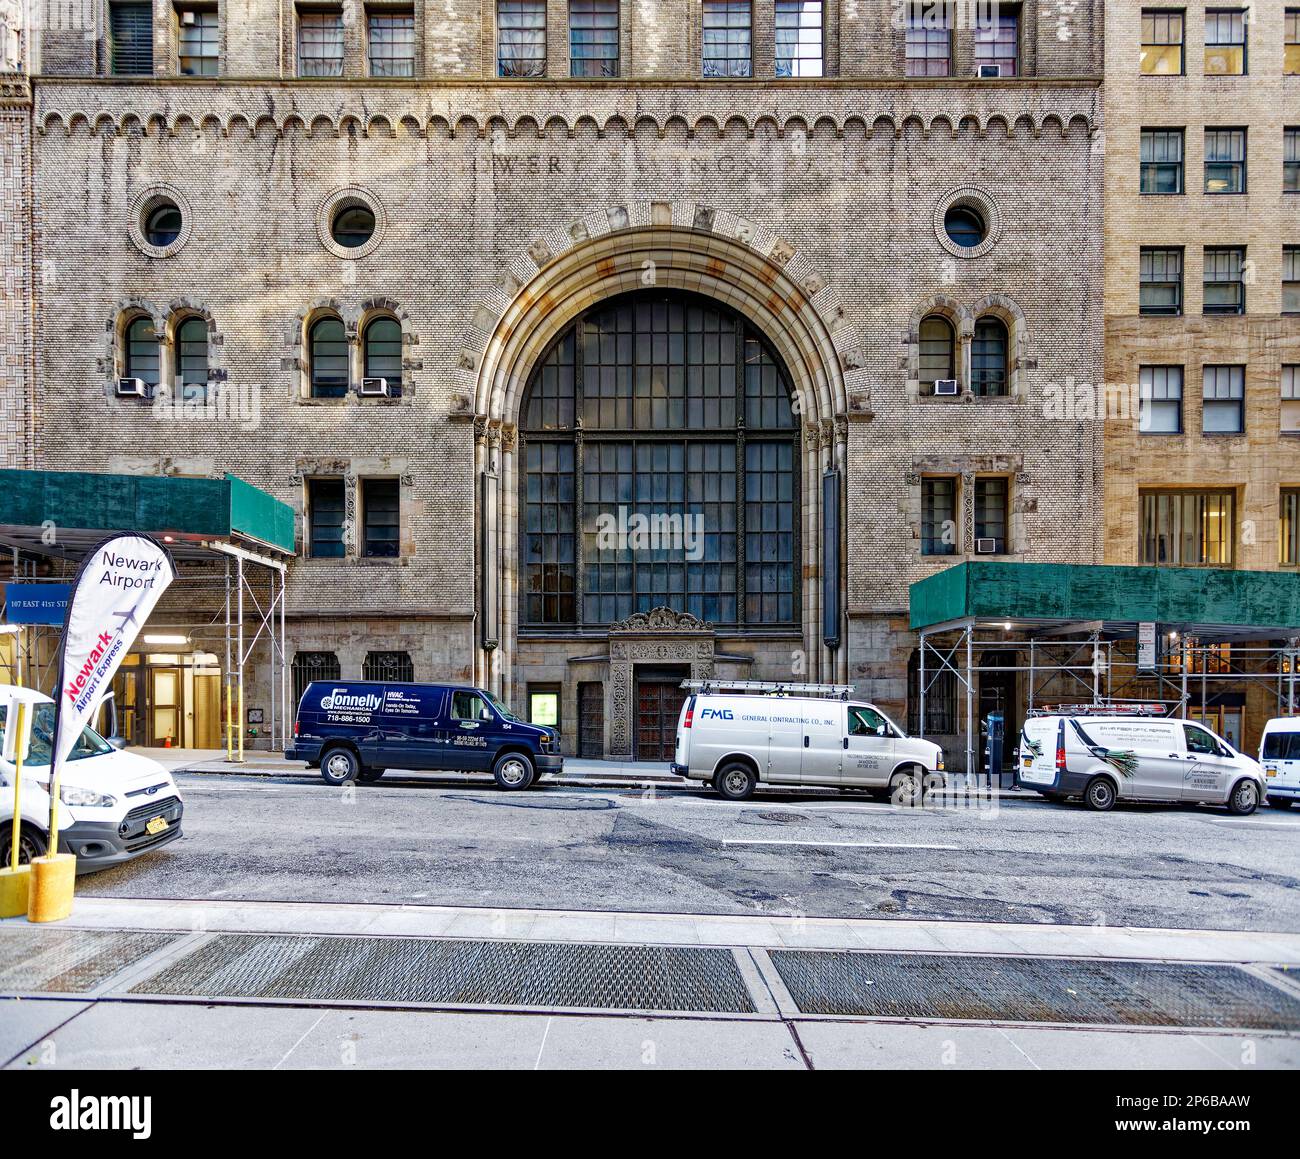 New York City designated landmark Bowery Savings Bank has its main entrance on East 42nd Street; these details are from the rear (East 41st Street). Stock Photo